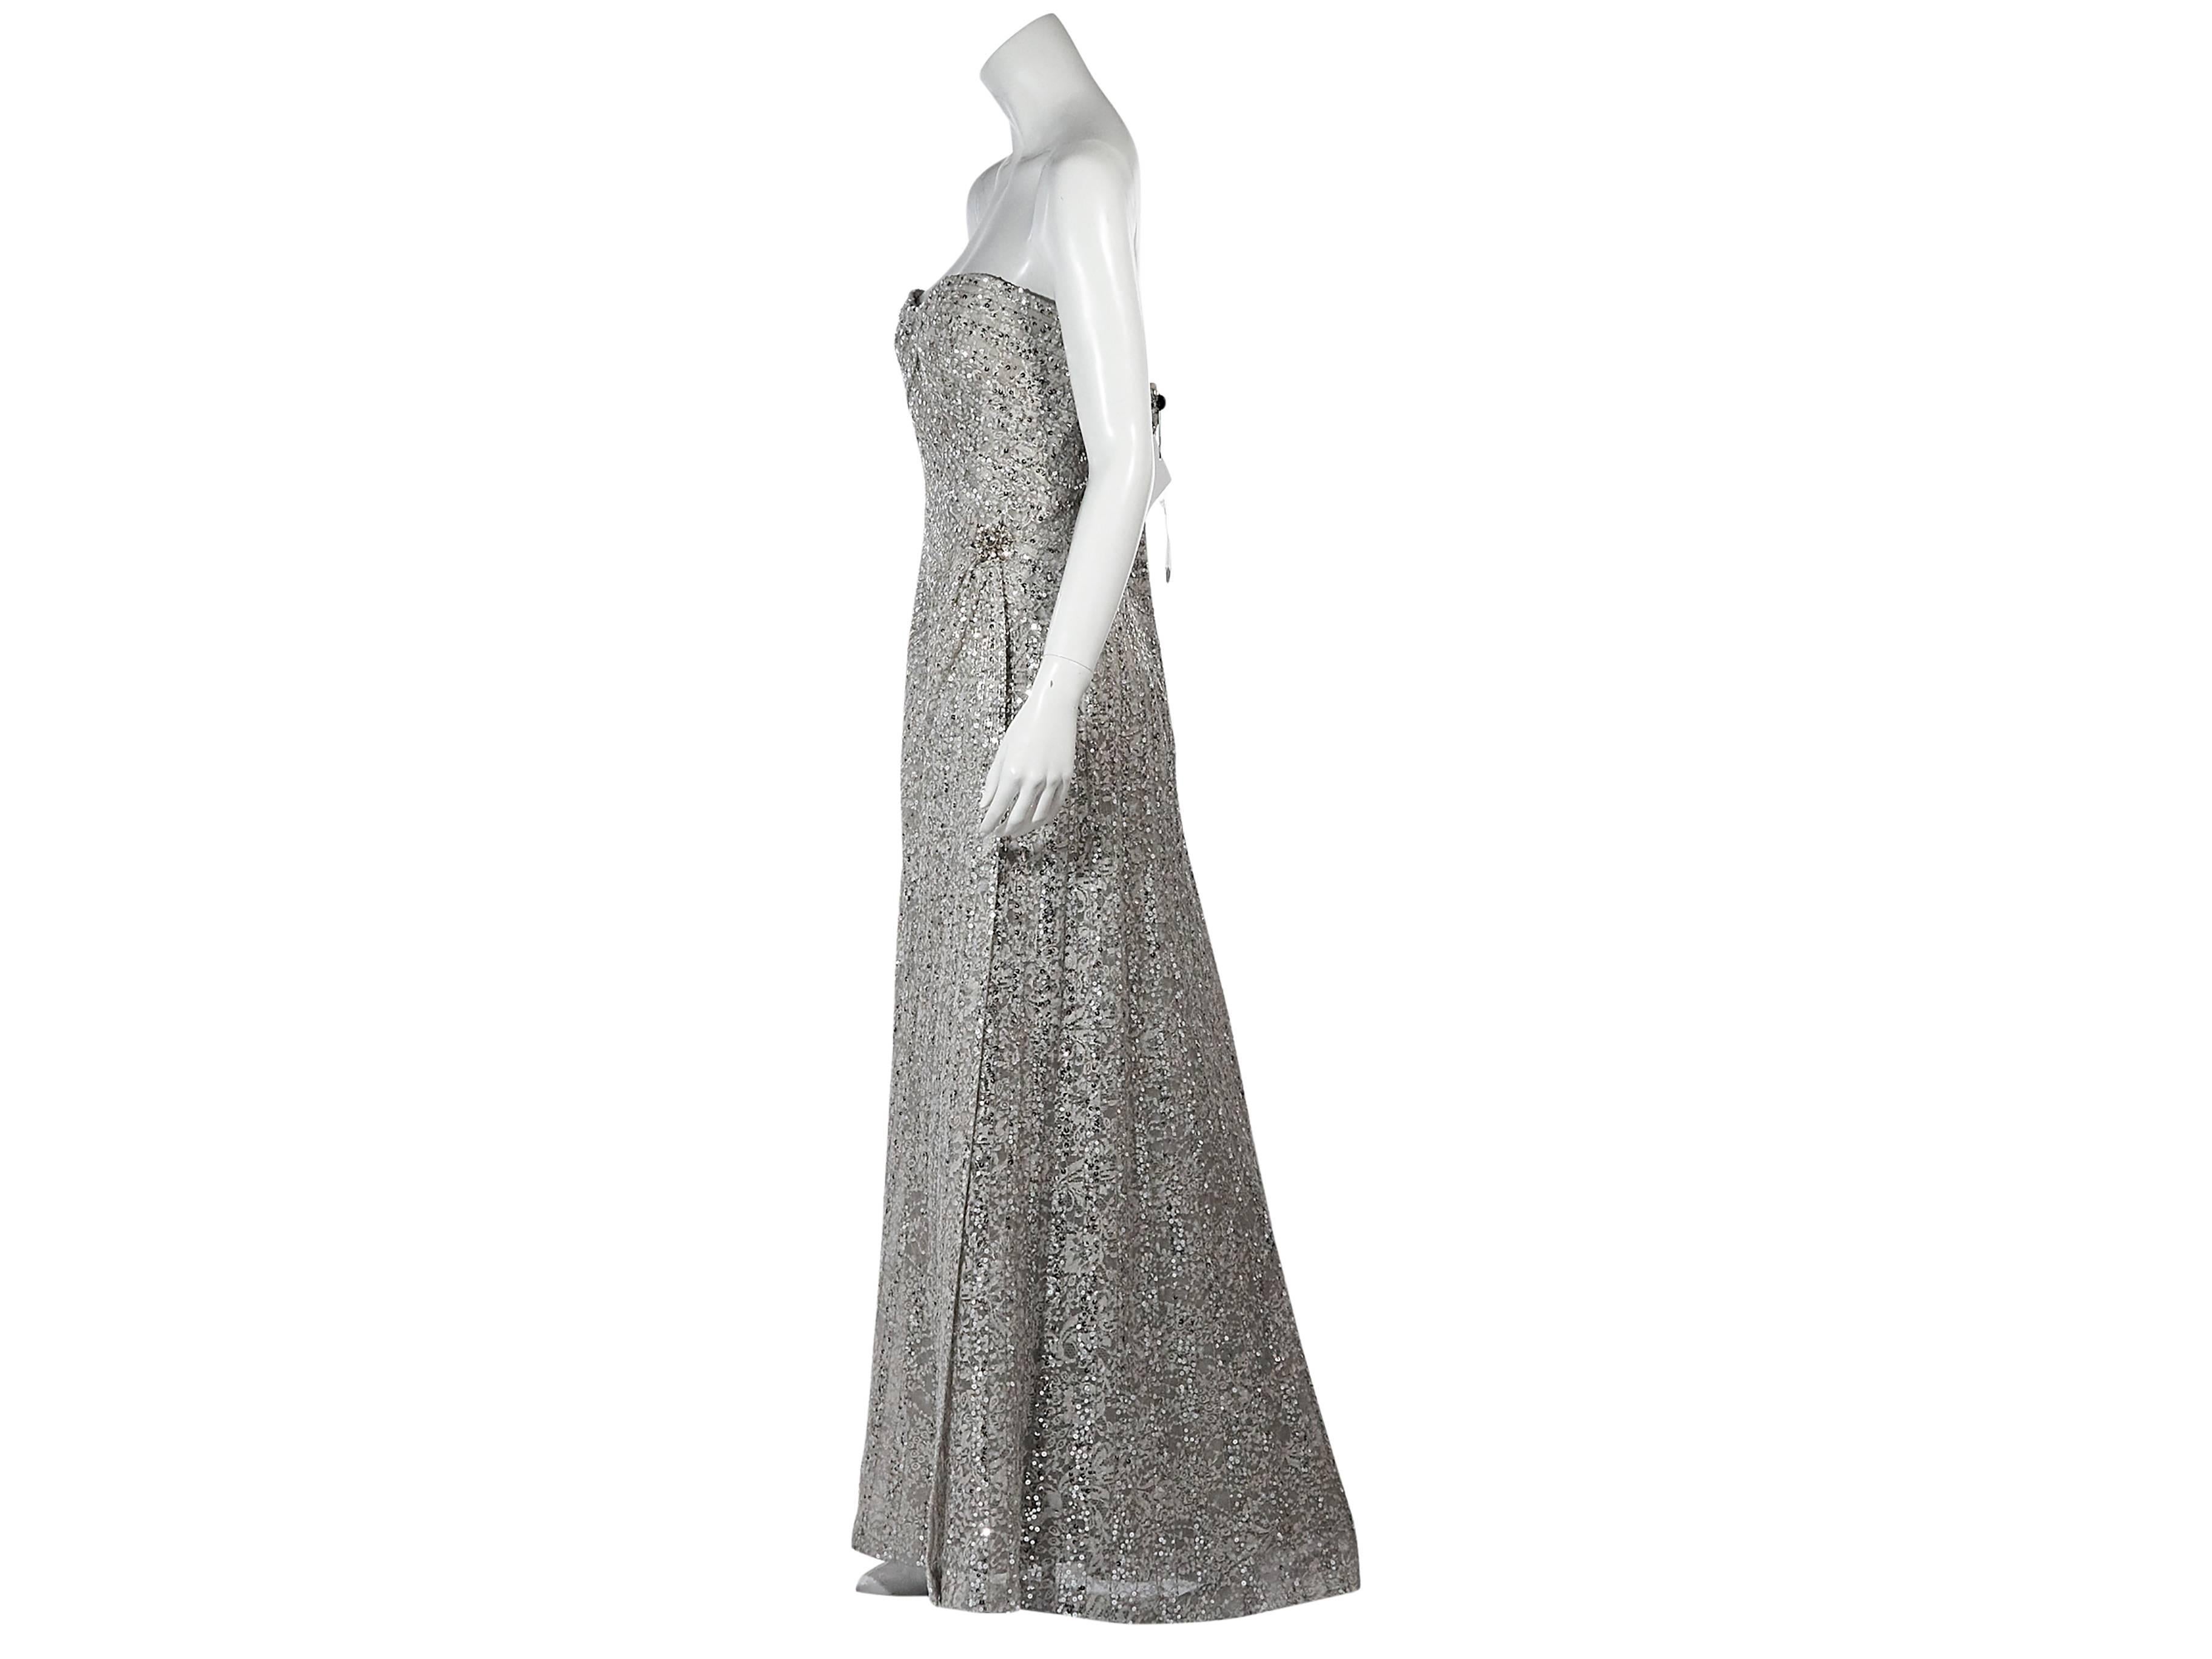 Product details:  Silver beaded lace gown by Carolina Herrera.  Strapless.  Sweetheart neck.  Embellished charm at hip.  Concealed back zip closure.  Inner zip-close support panel. 
Condition: New with tags. 
Est. Retail $ 4,228.00